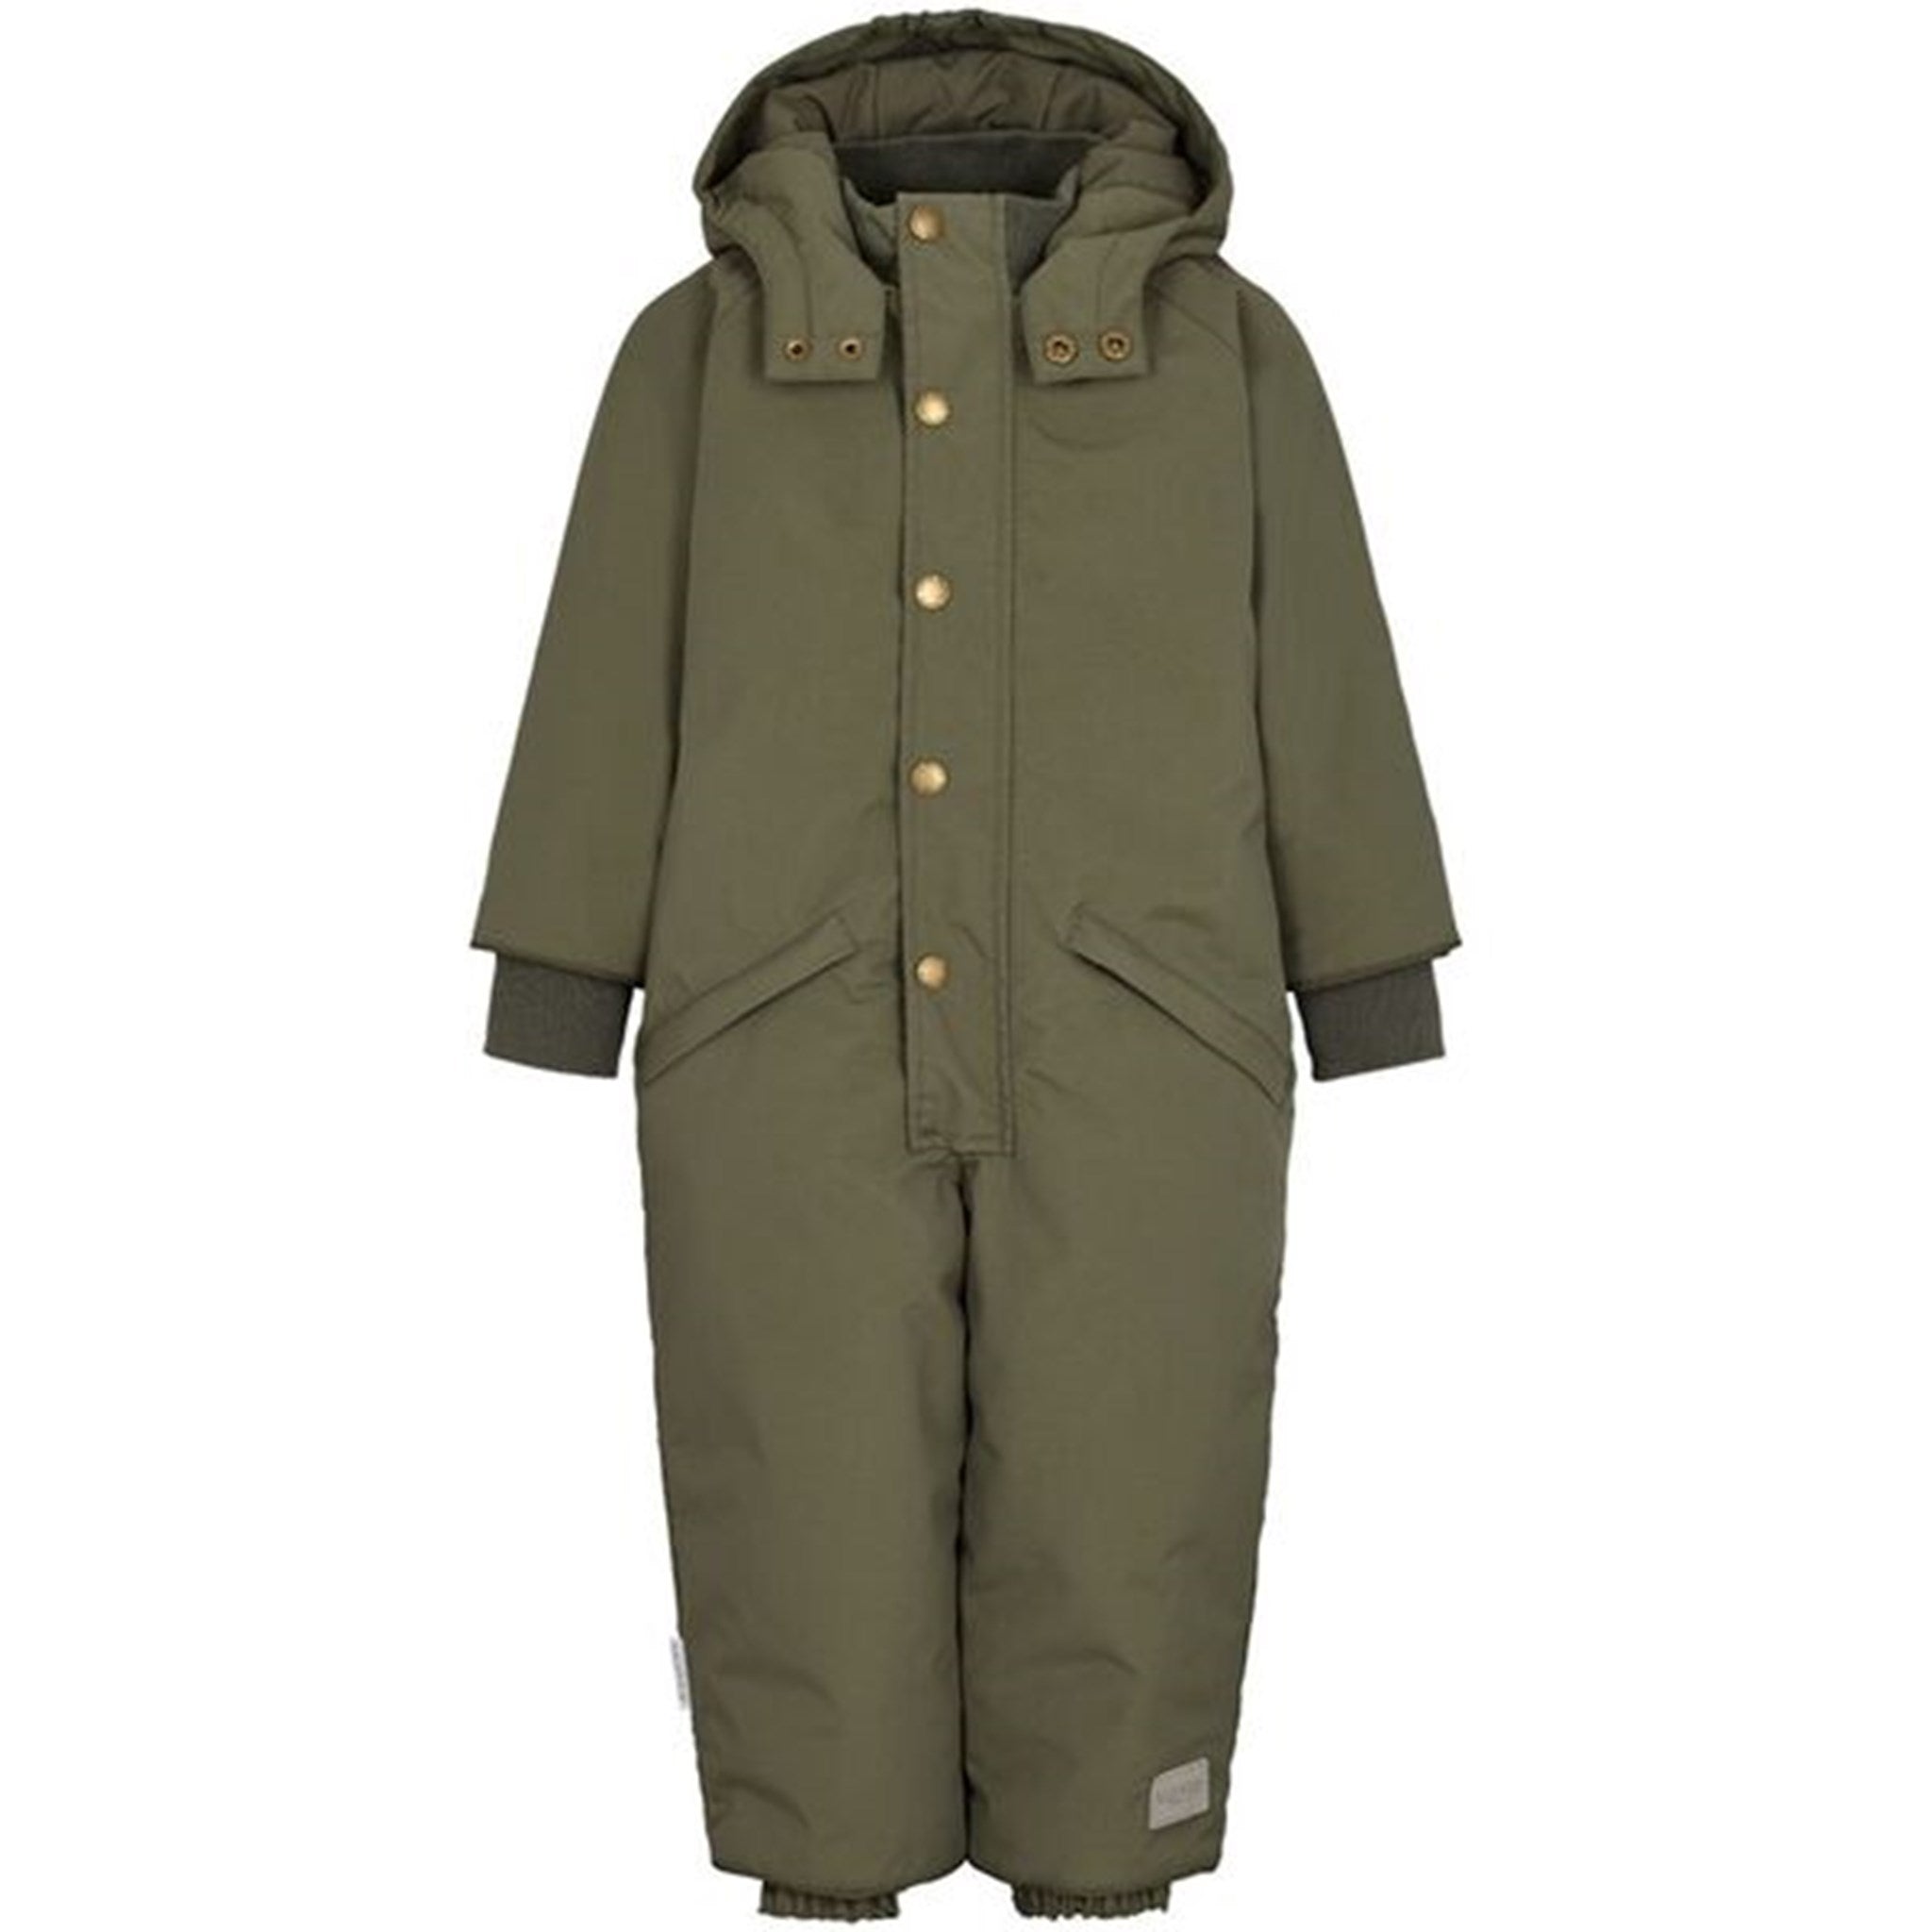 MarMar Overall Ollie Hunter Technical Outerwear